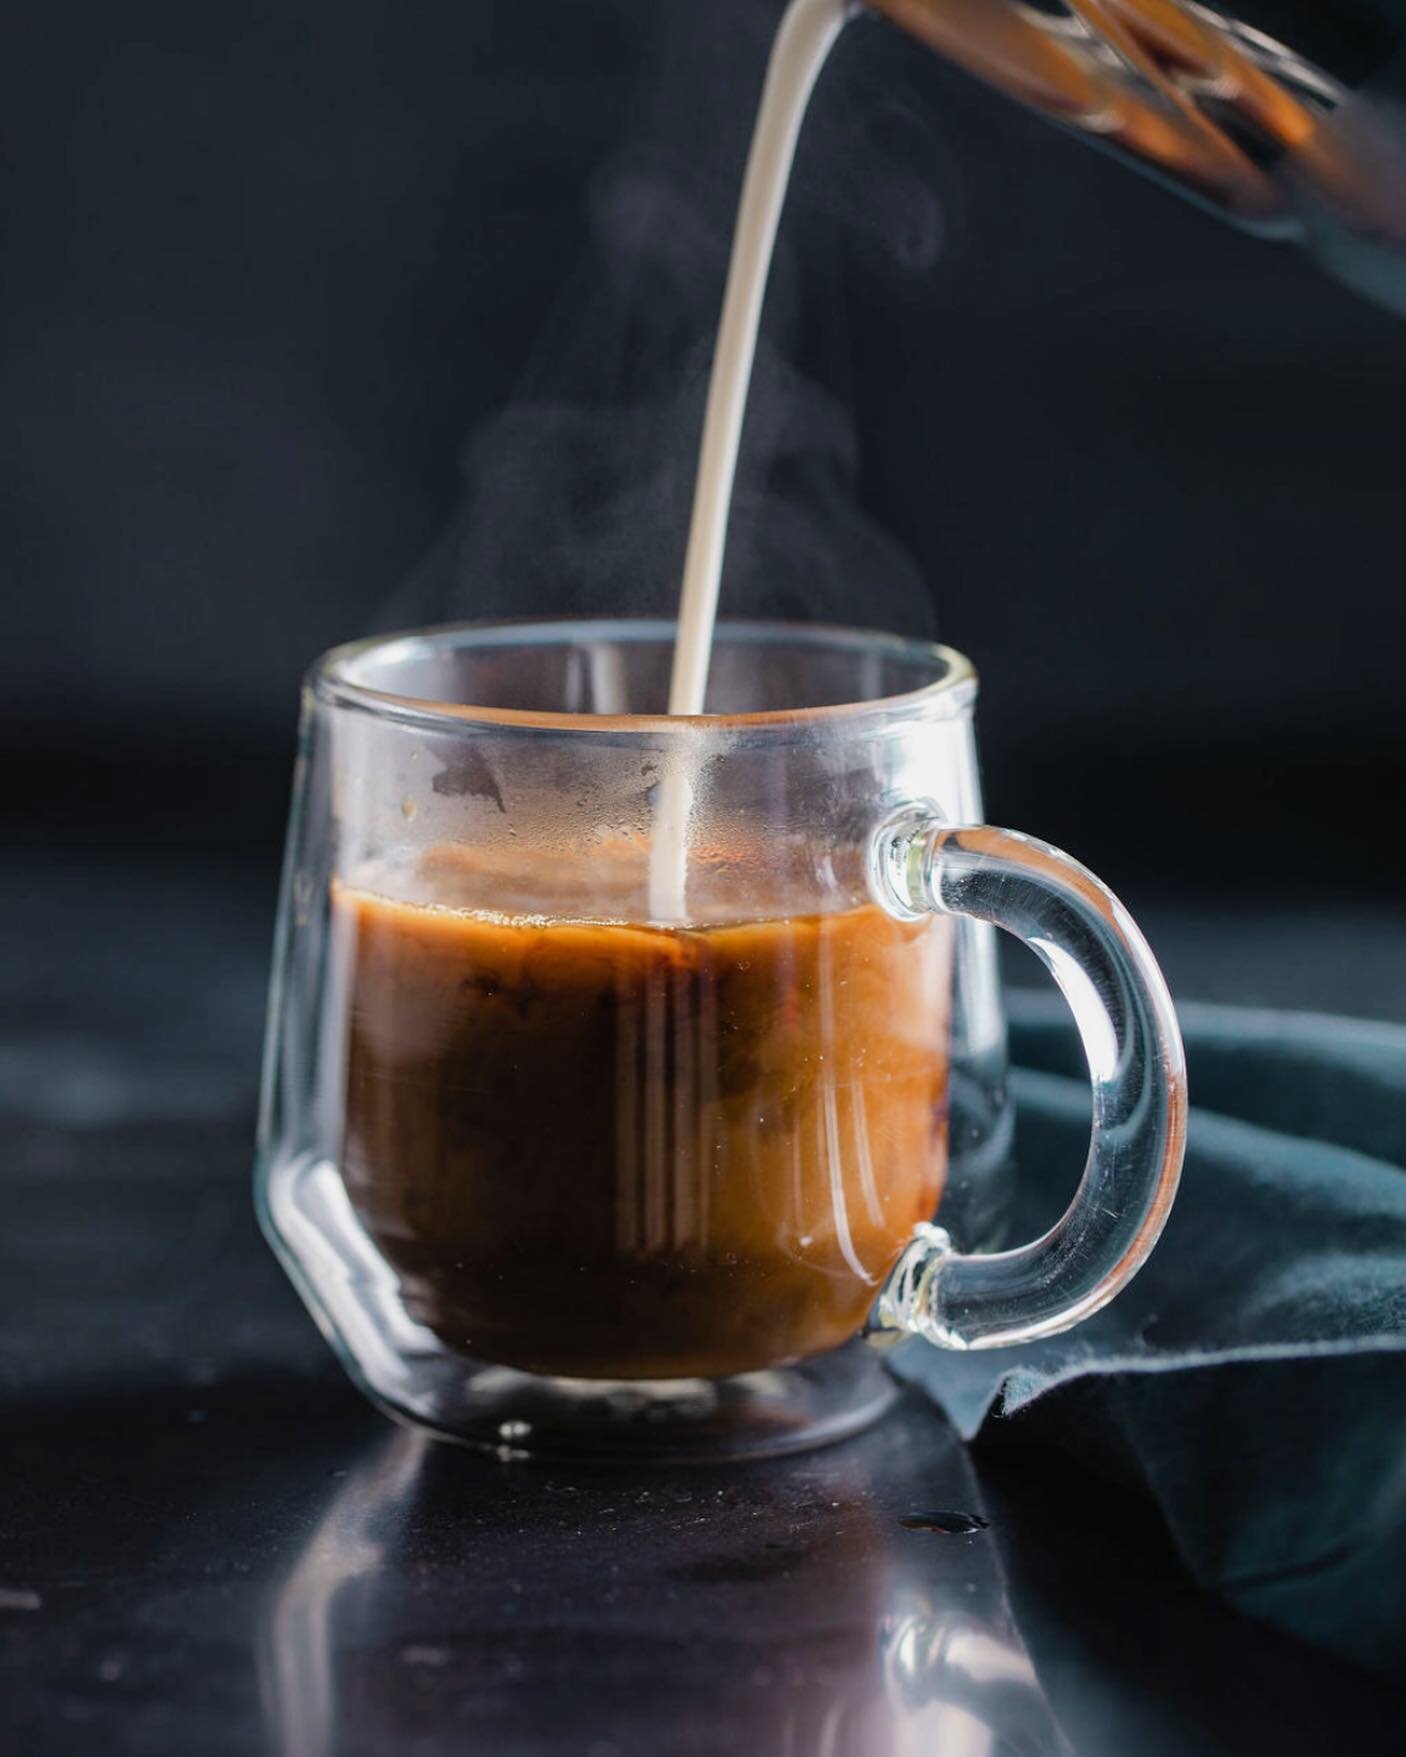 We have had a super productive weekend and now I just want cuddle up and be lazy with a delicious cup of coffee. I teamed up with @adoscoffee for this shoot and their butterscotch coffee is so gooood. 

This was also the first use of my new backgroun